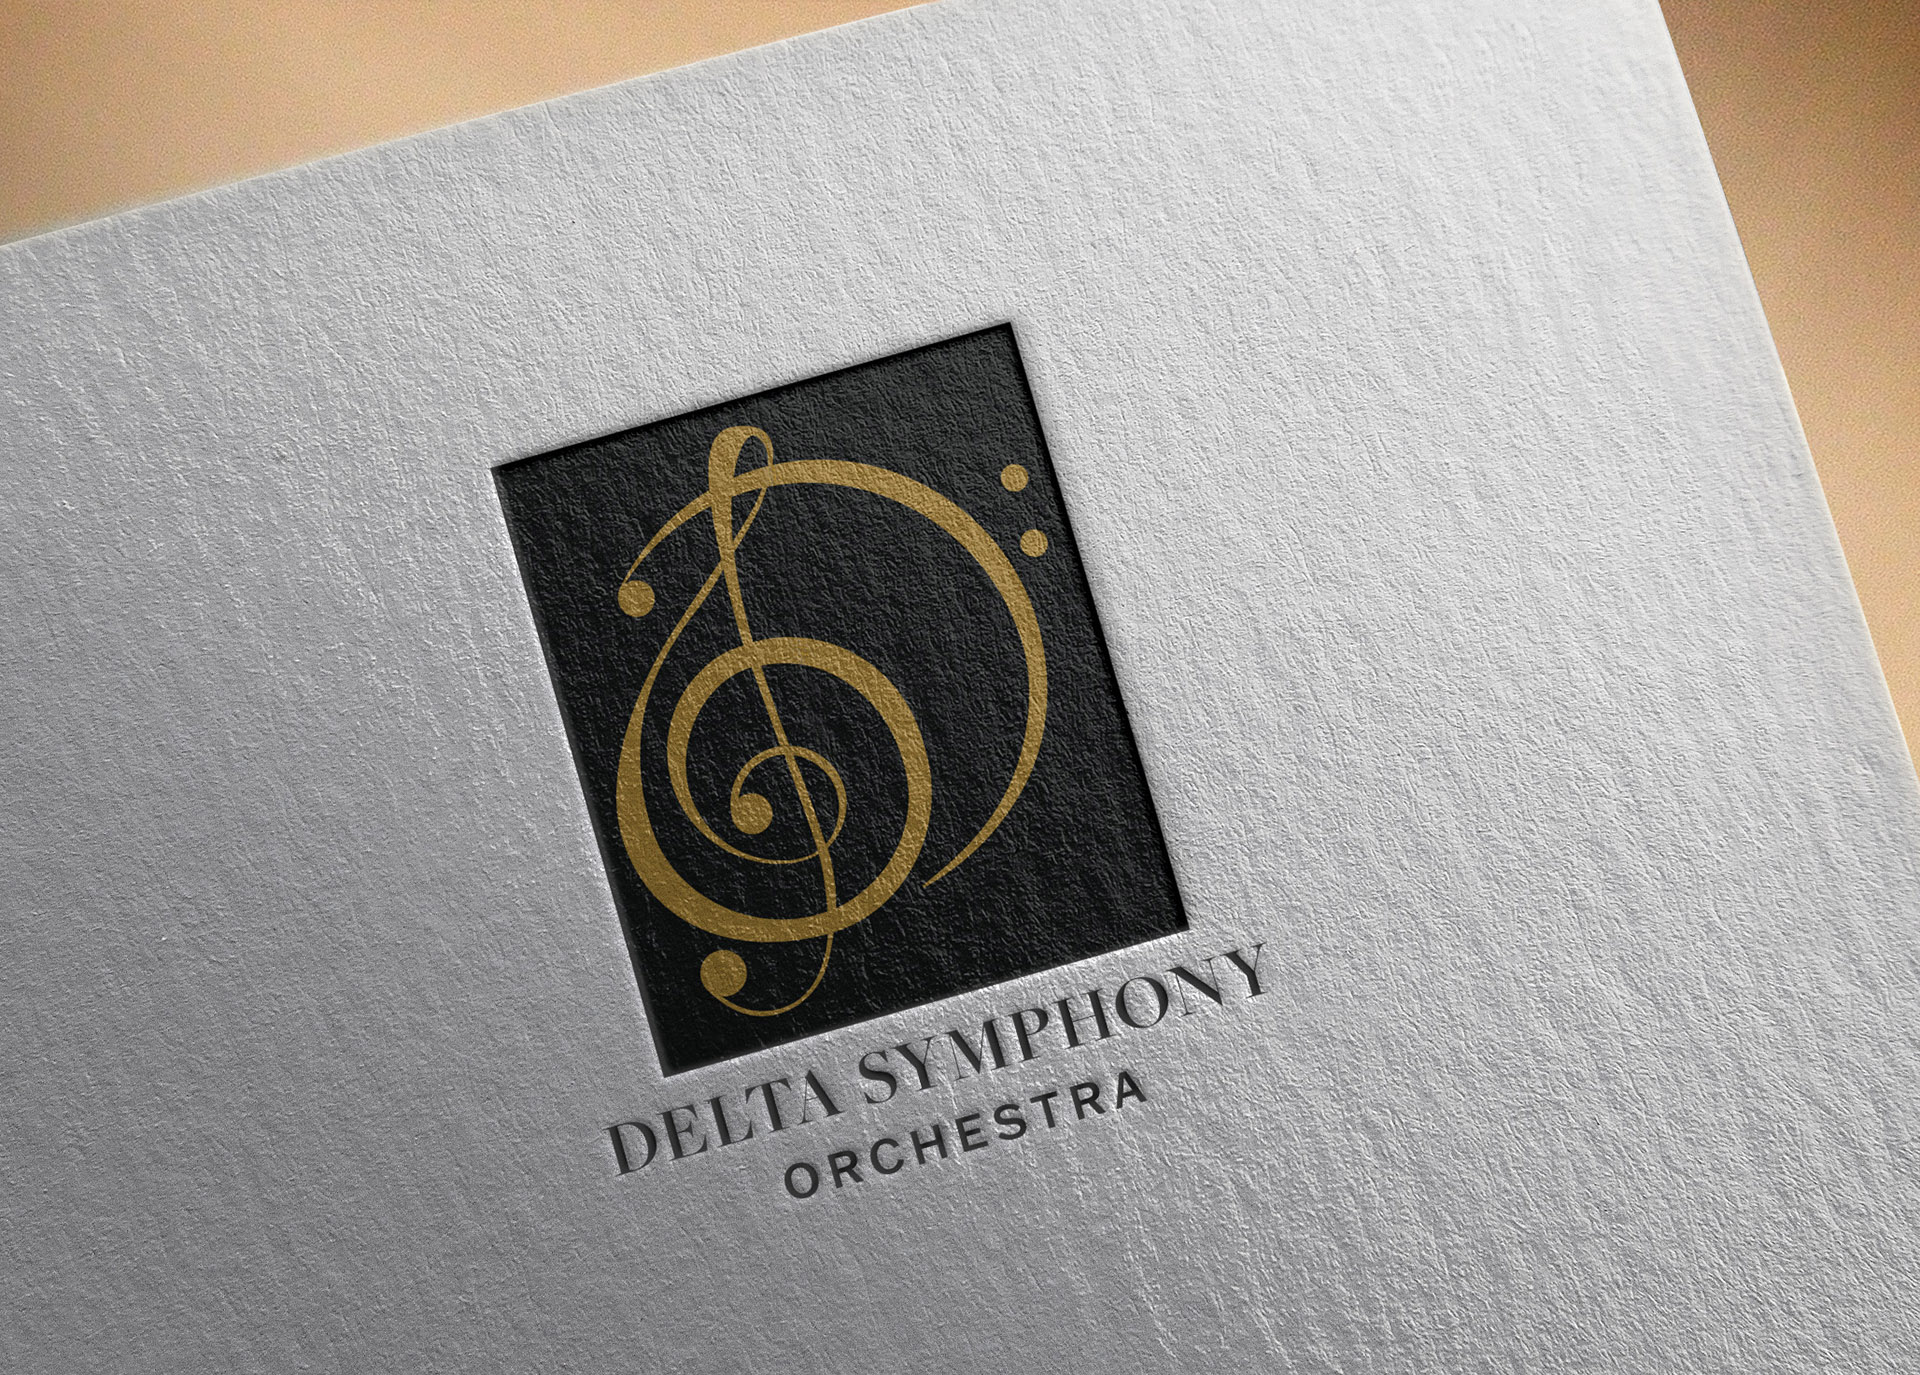 mockup of delta symphony orchestra logo on textured paper